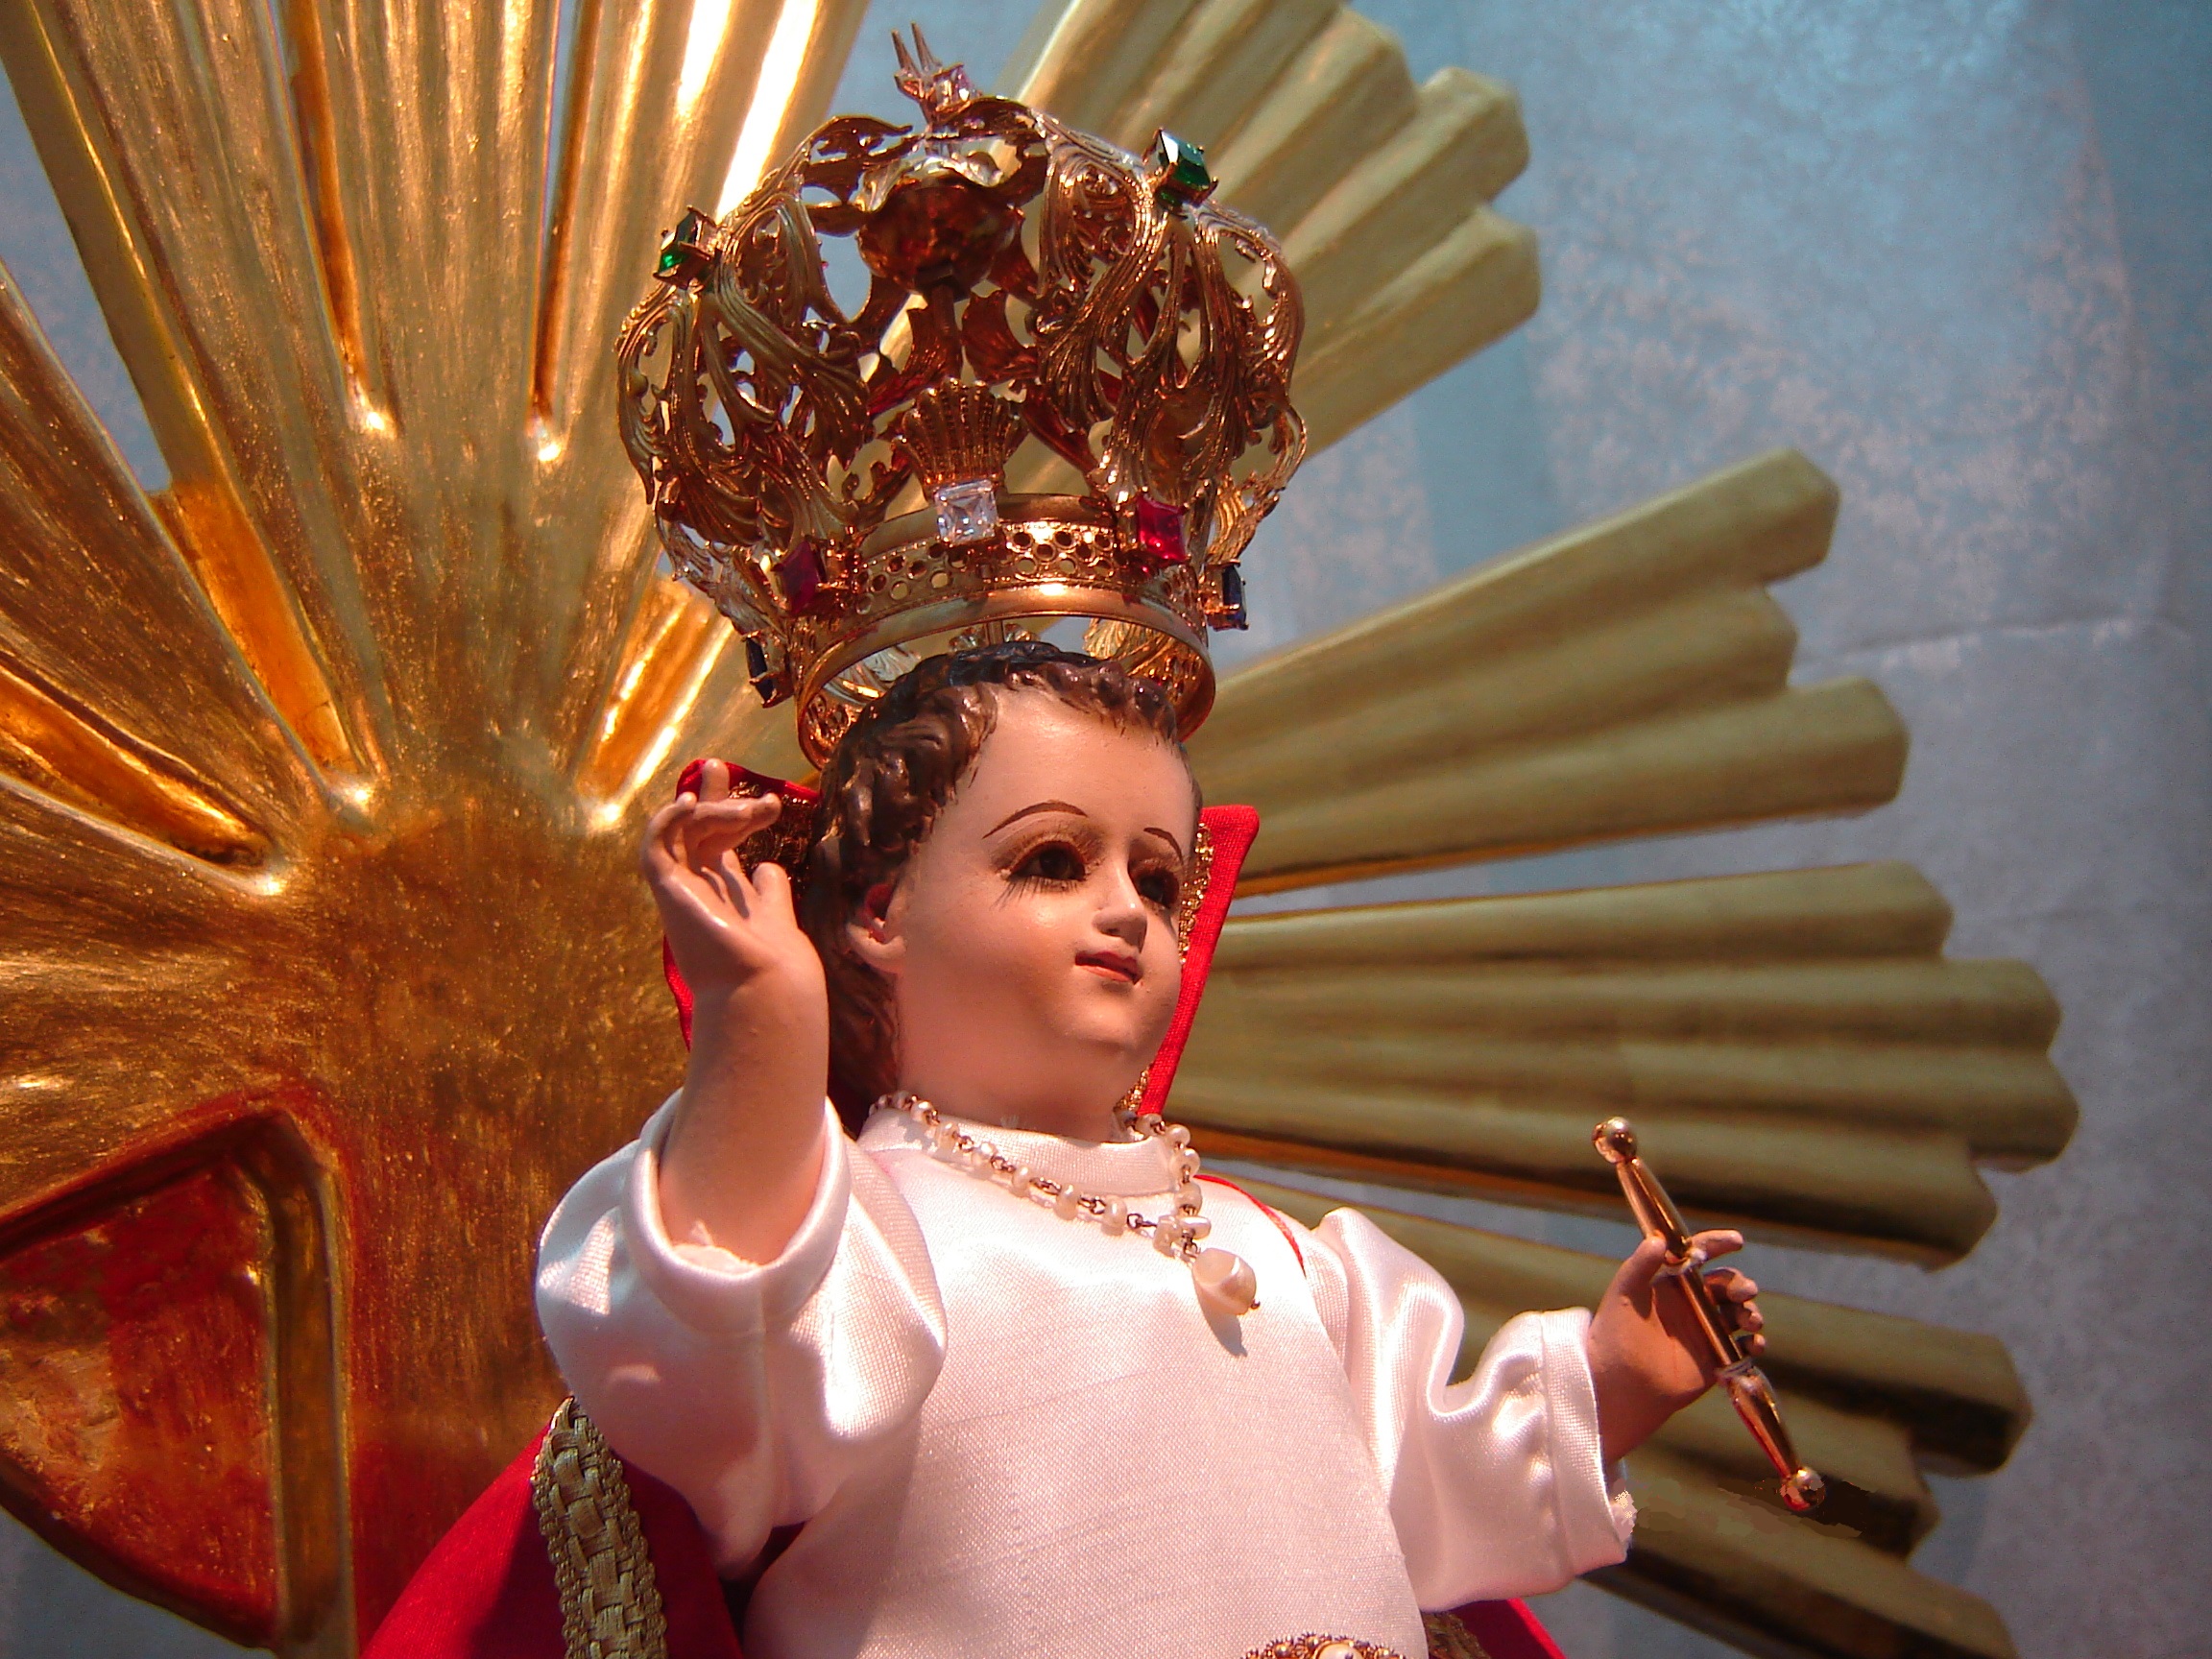 Holy Infant of Good Health - Wikipedia